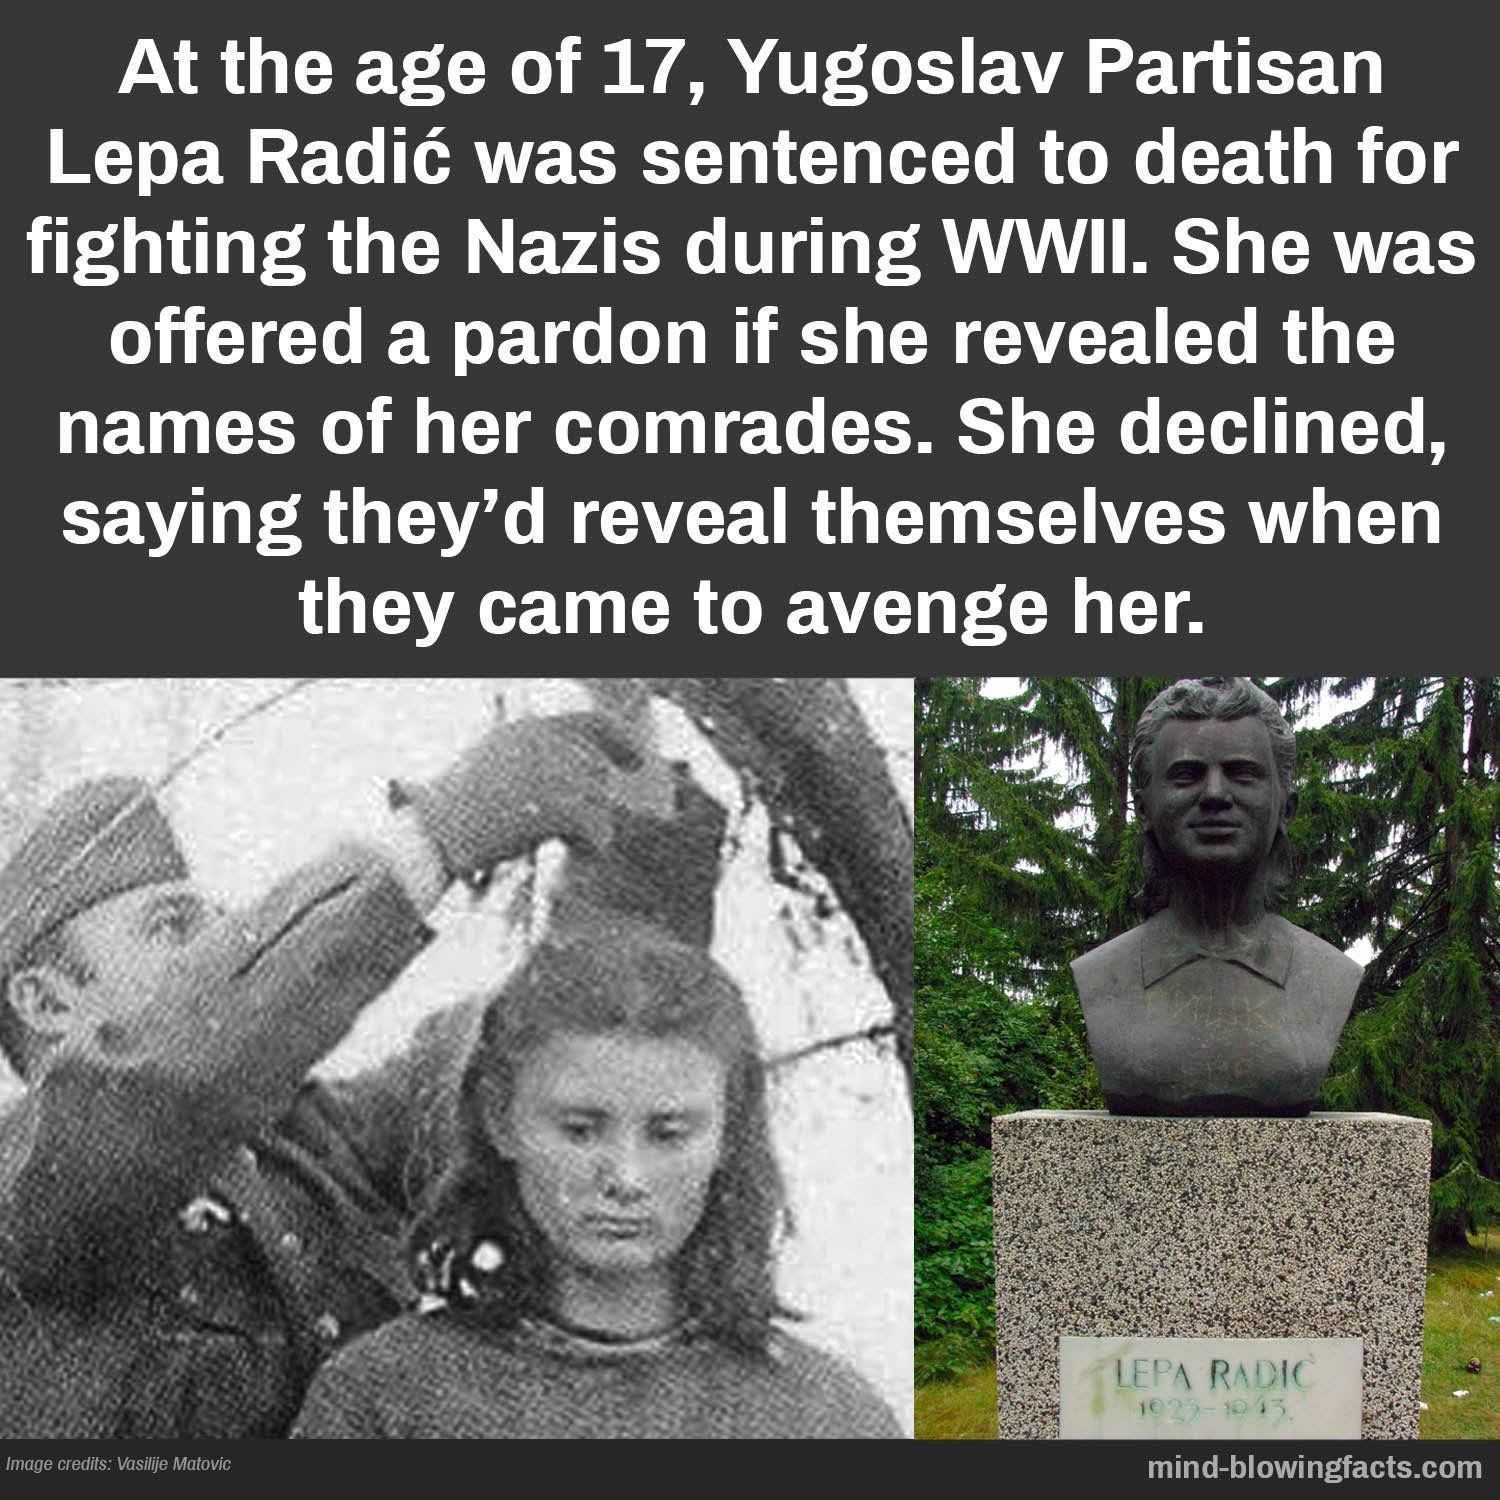 Pin by Kathleen Boehmig on Heroes | History facts, History memes, Mind blowing facts